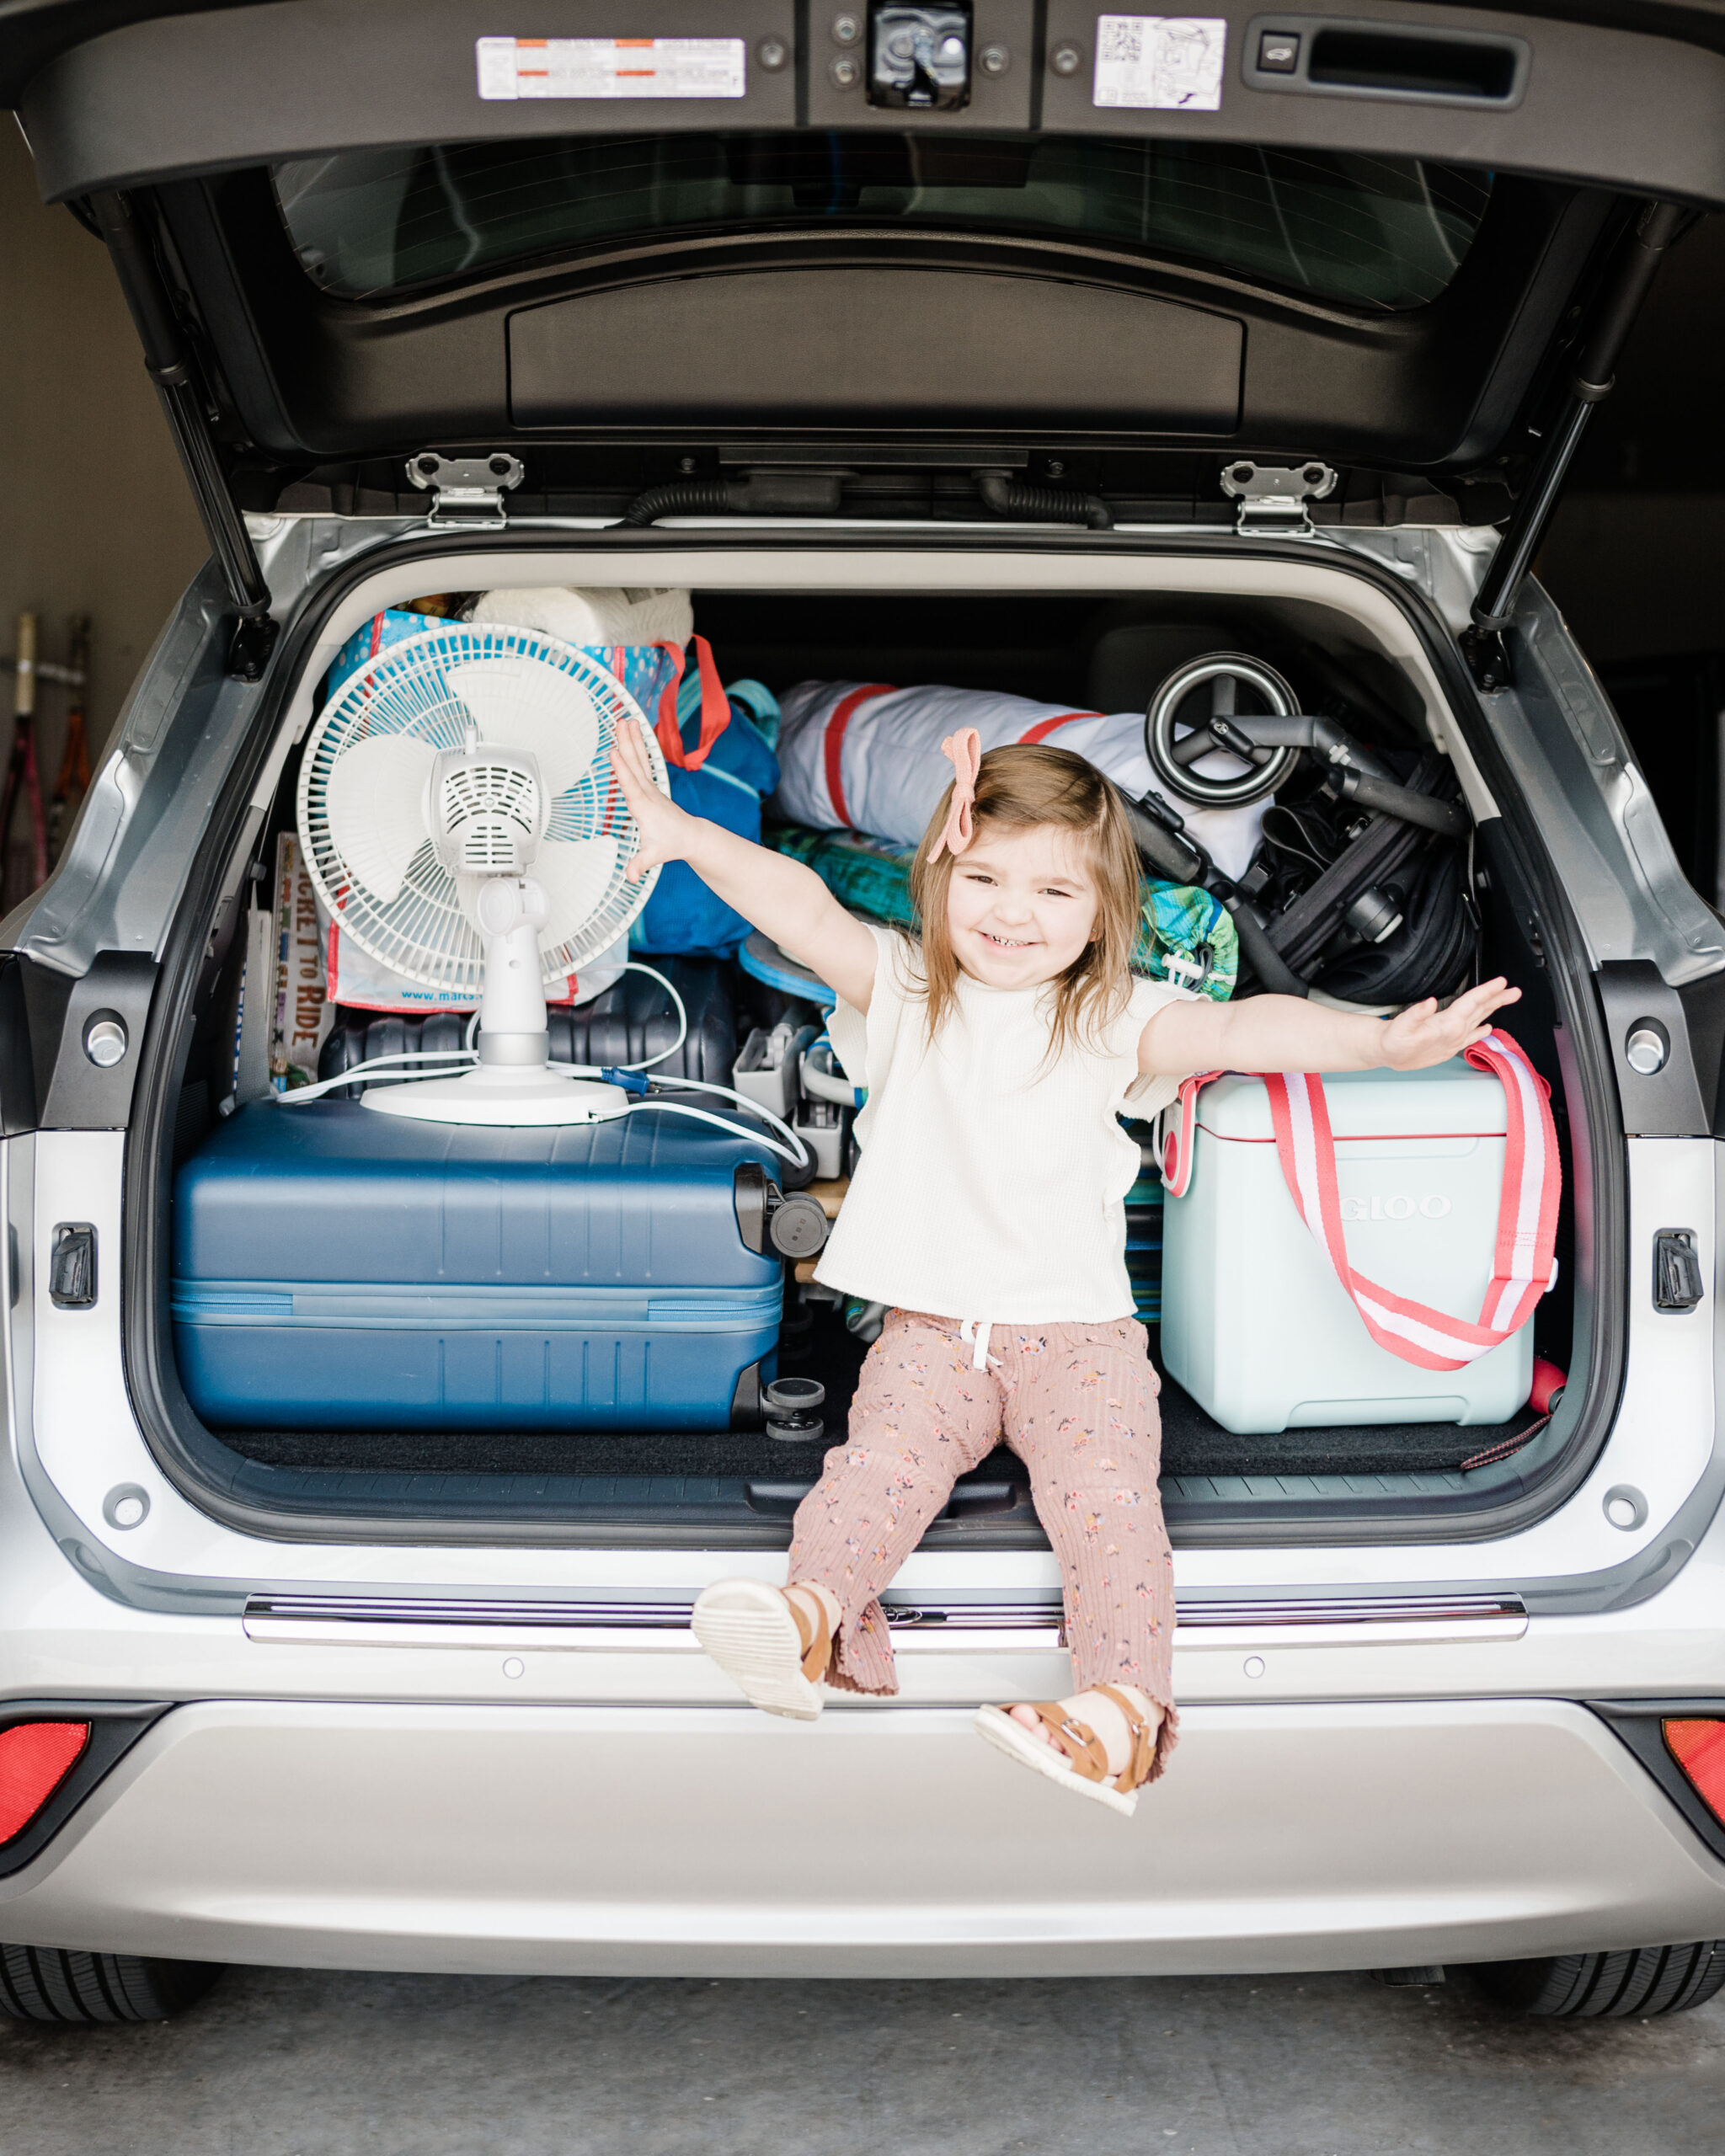 Amazon Road Trip Essentials for kids--Eleanor sitting on tailgate with luggage ready for road trip